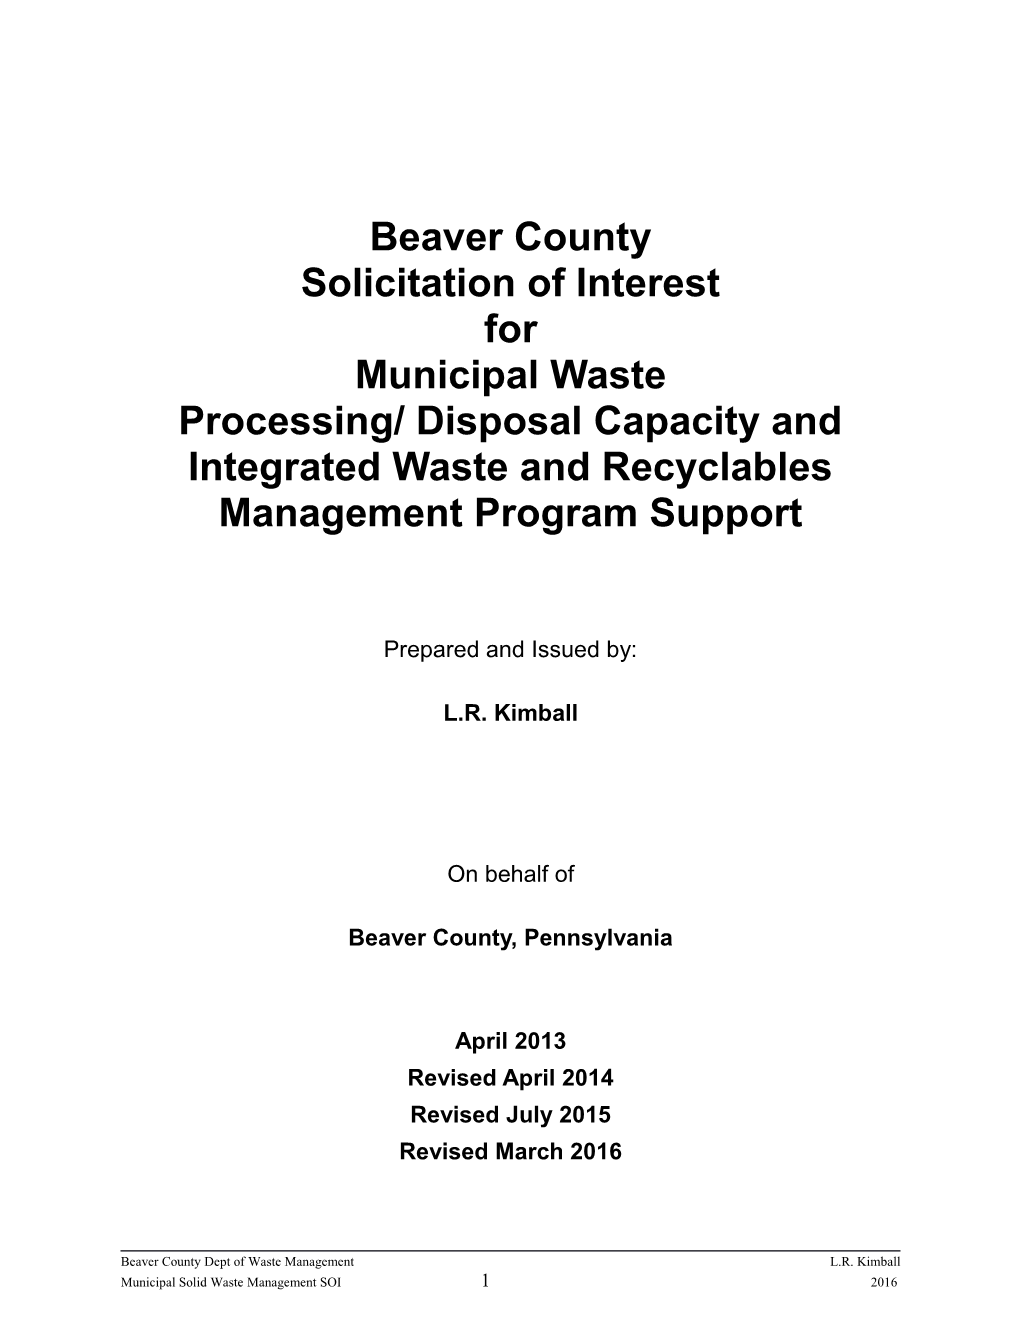 Processing/Disposal Capacity and Integrated Waste and Recyclables Management Program Support